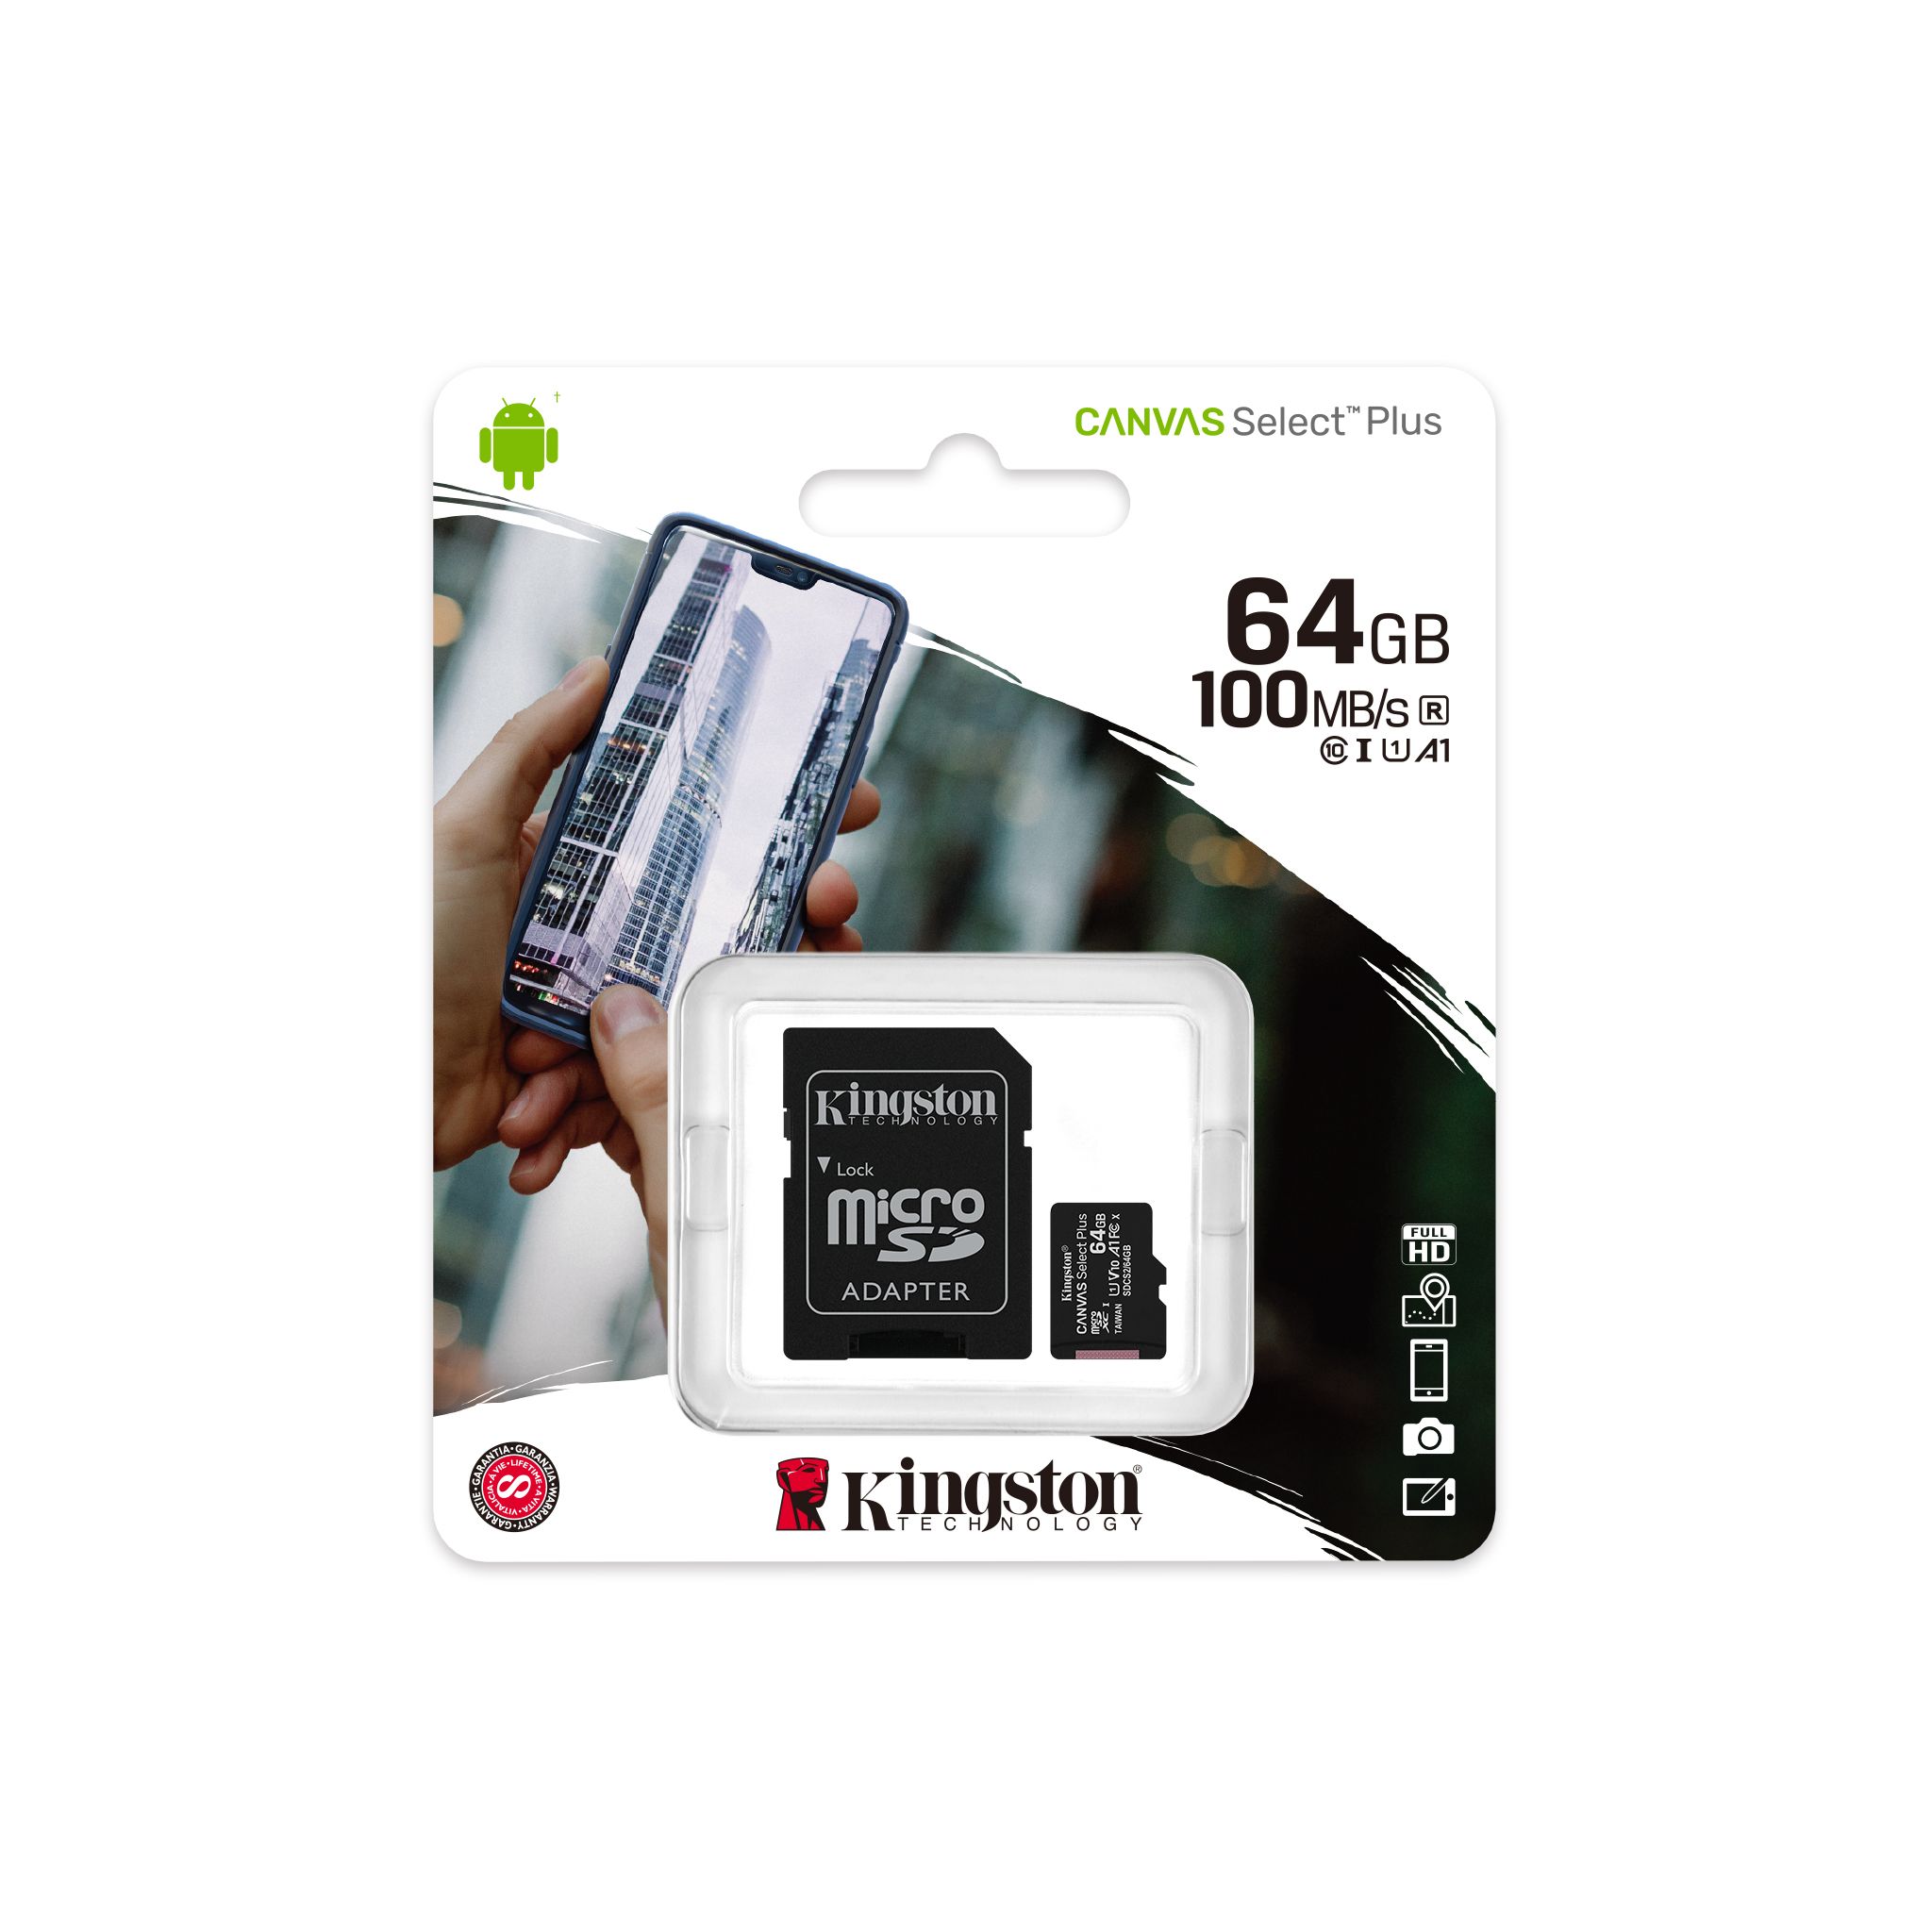 Kingston 64GB LG LS665 MicroSDXC Canvas Select Plus Card Verified by SanFlash. 100MBs Works with Kingston 